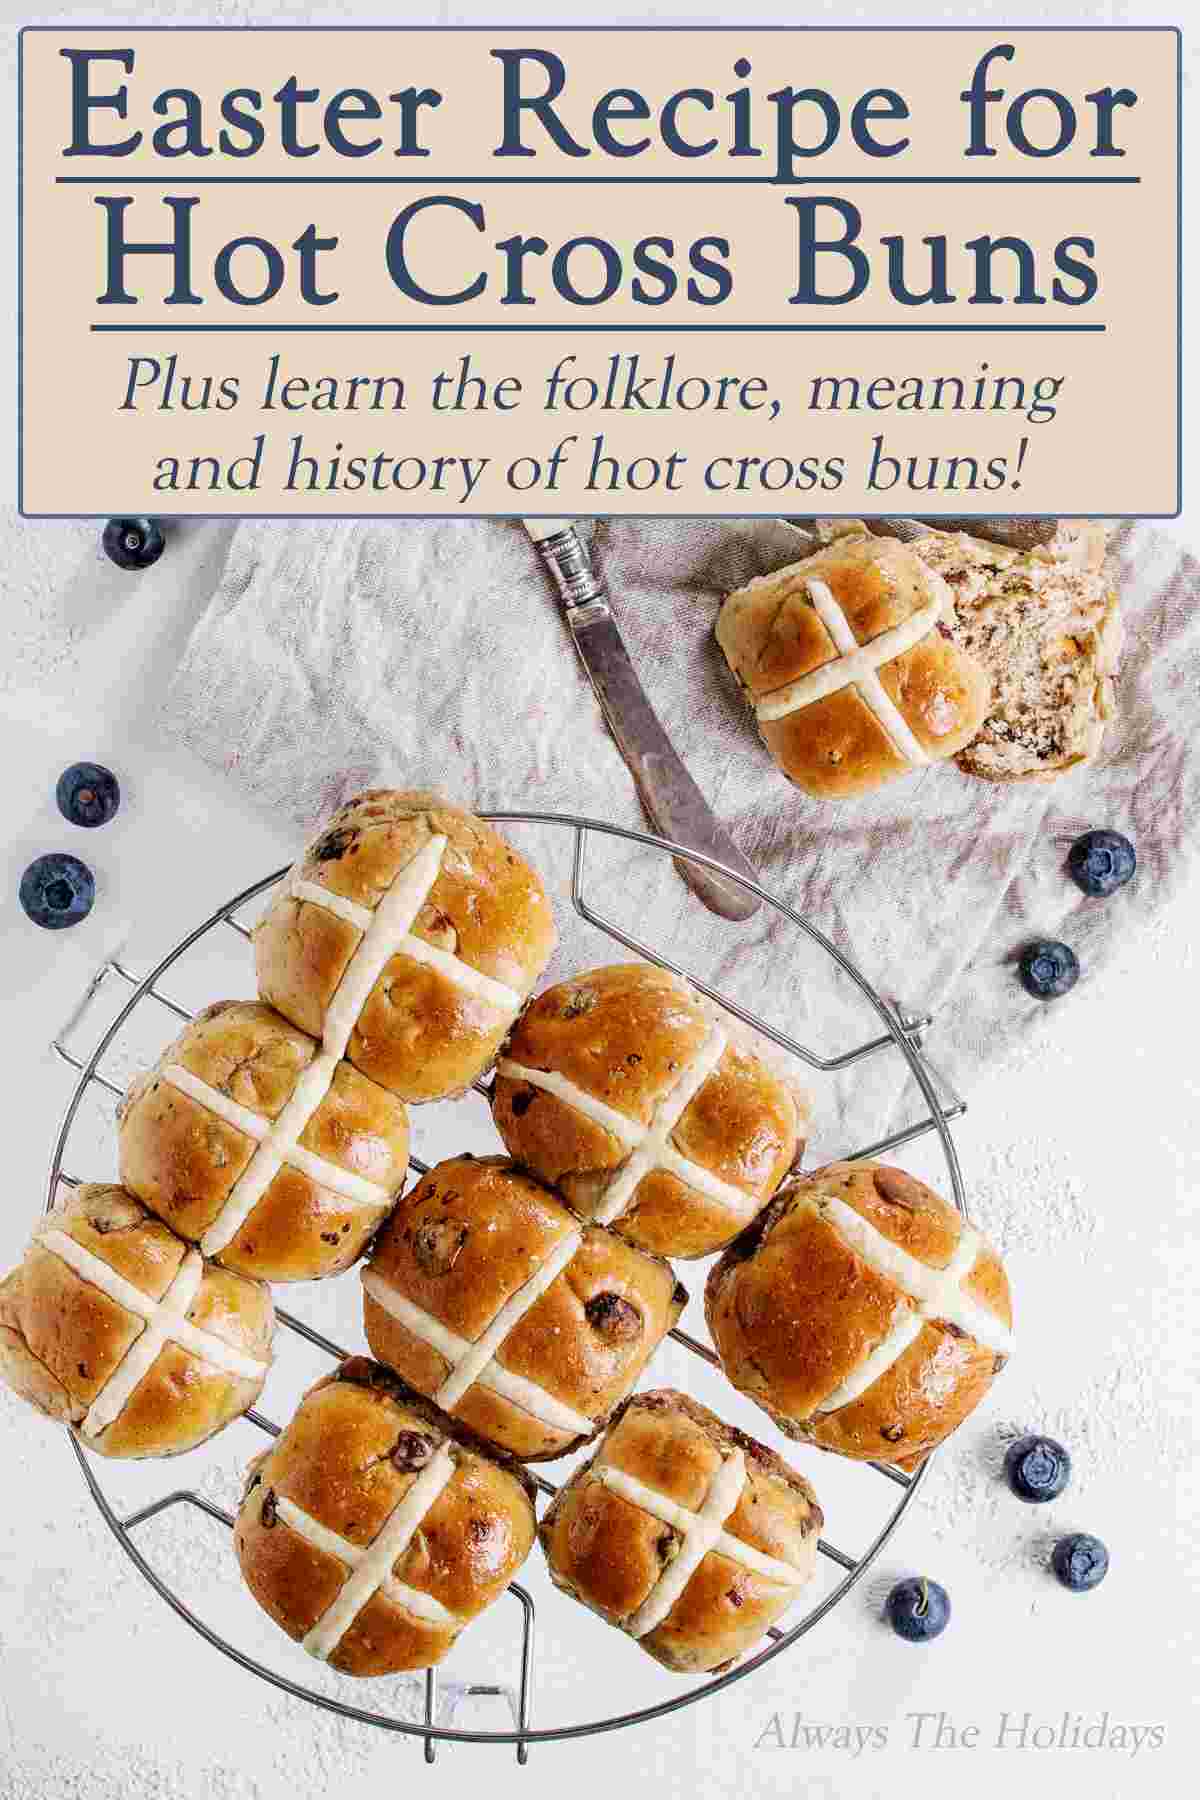 A cooling rack of hot cross buns with a text overlay that reads "Easter Recipe for Hot Cross Buns, plus learn the folklore, meaning and history of hot cross buns".